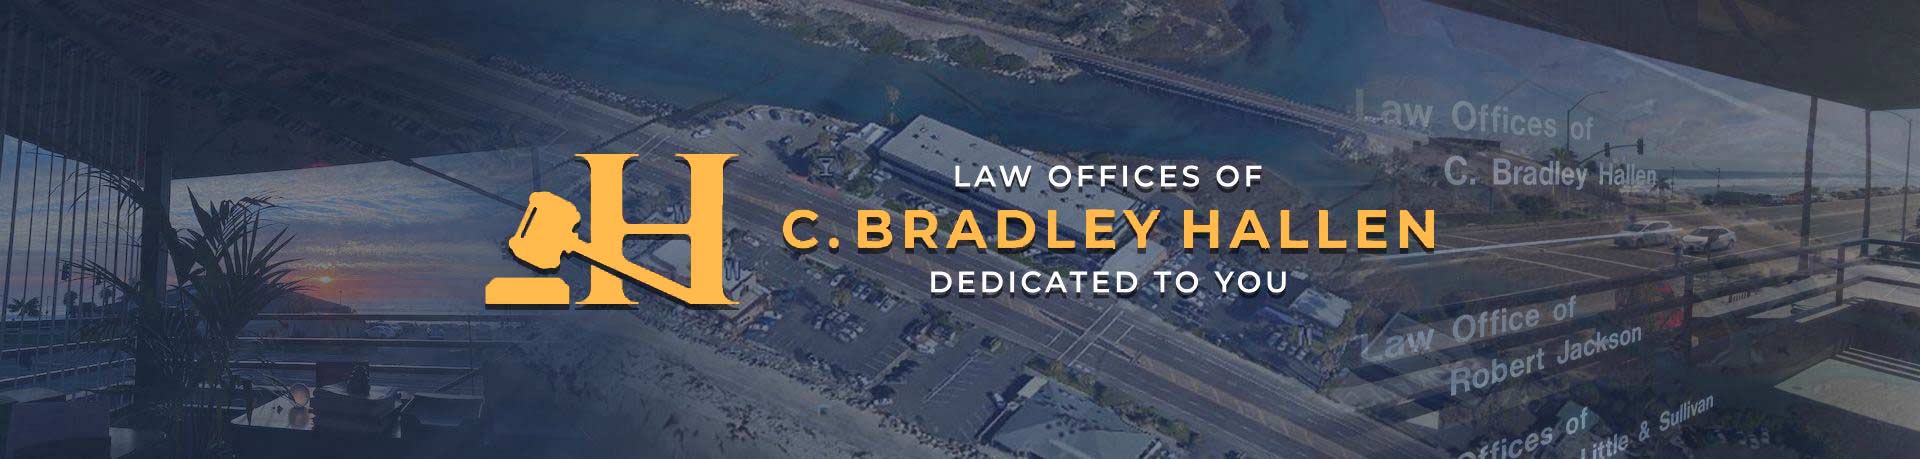 Law Offices of C. Bradley Hallen | Dedicated To You